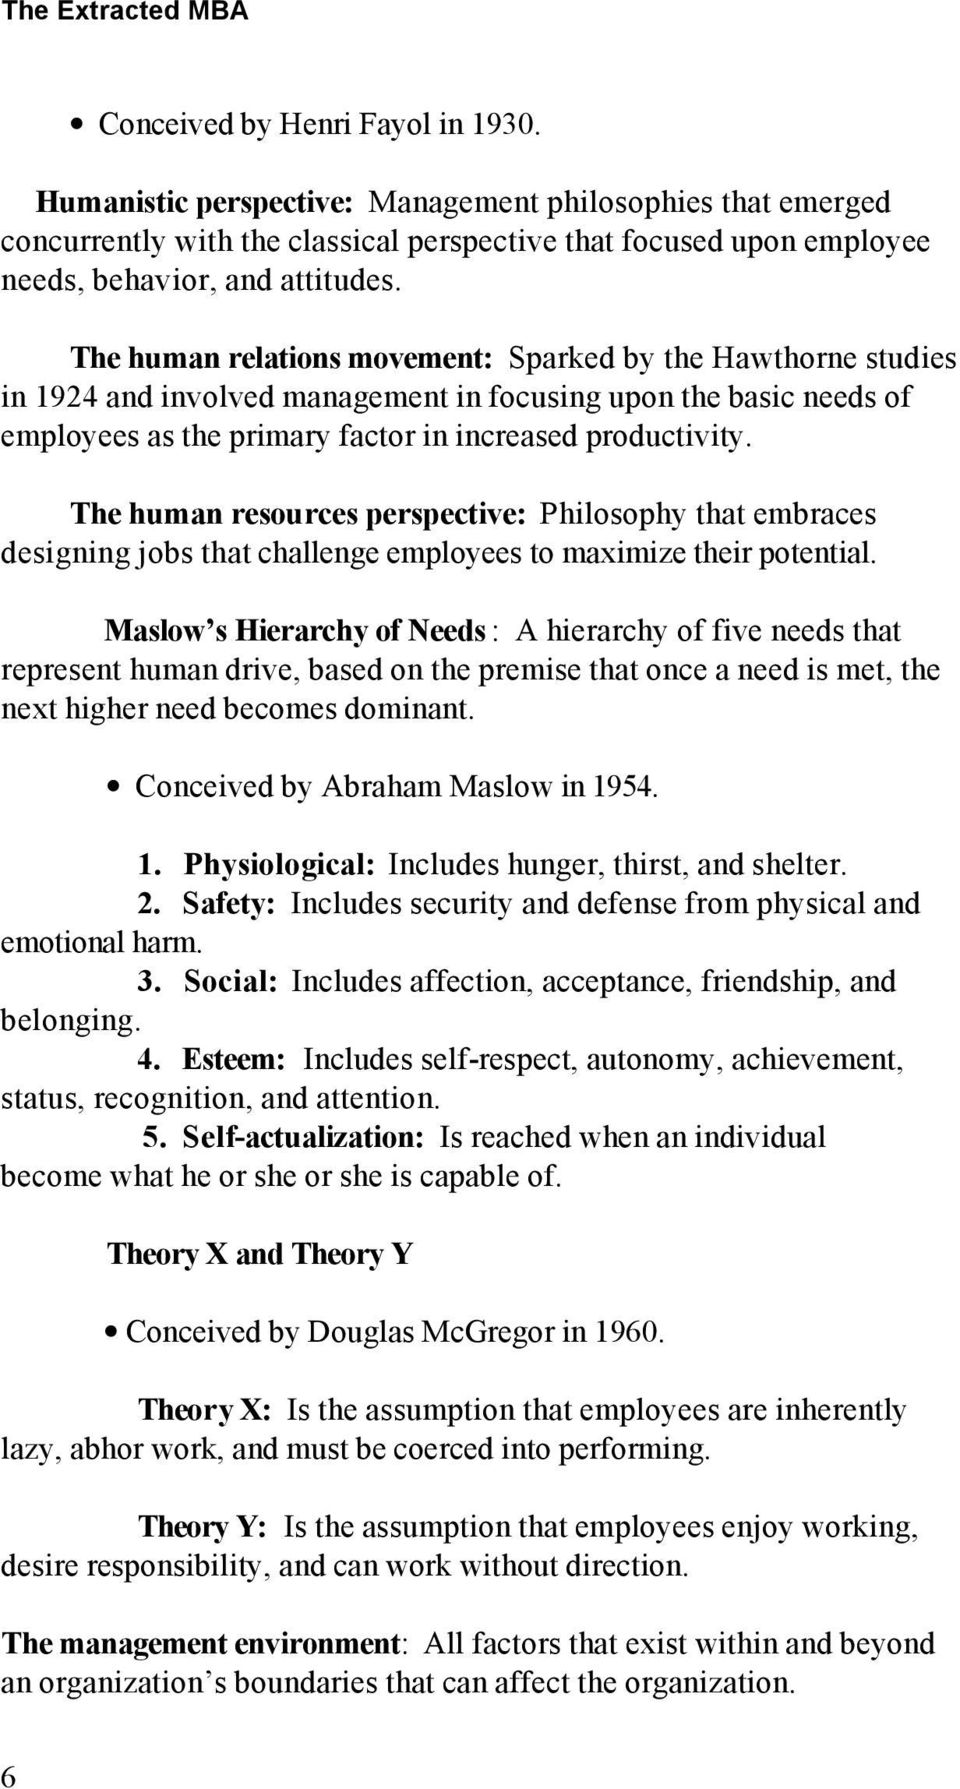 The human relations movement: Sparked by the Hawthorne studies in 1924 and involved management in focusing upon the basic needs of employees as the primary factor in increased productivity.